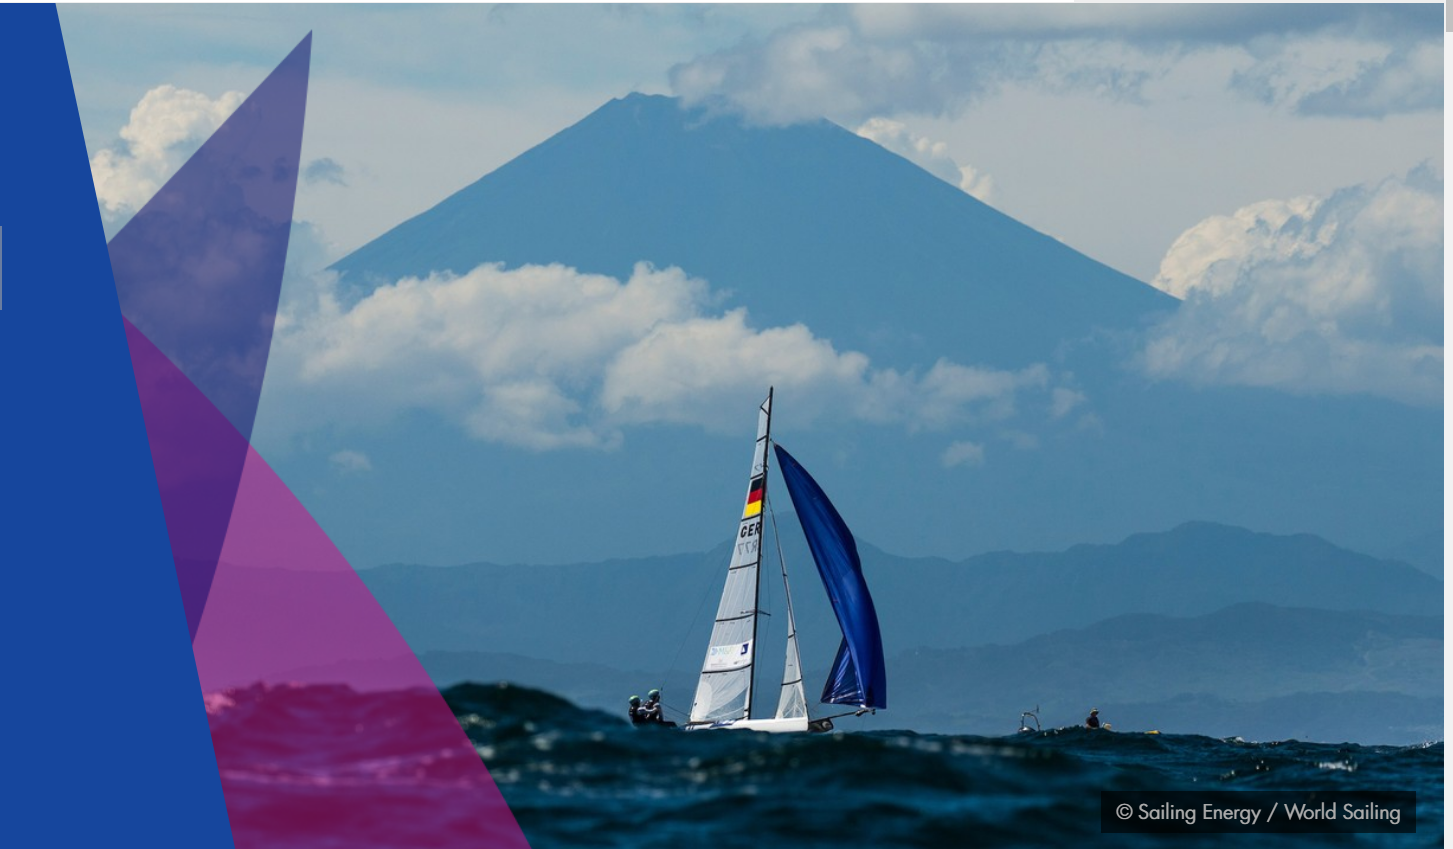 Ready Steady Tokyo - Sailing to set the 2020 Olympic scene one year out